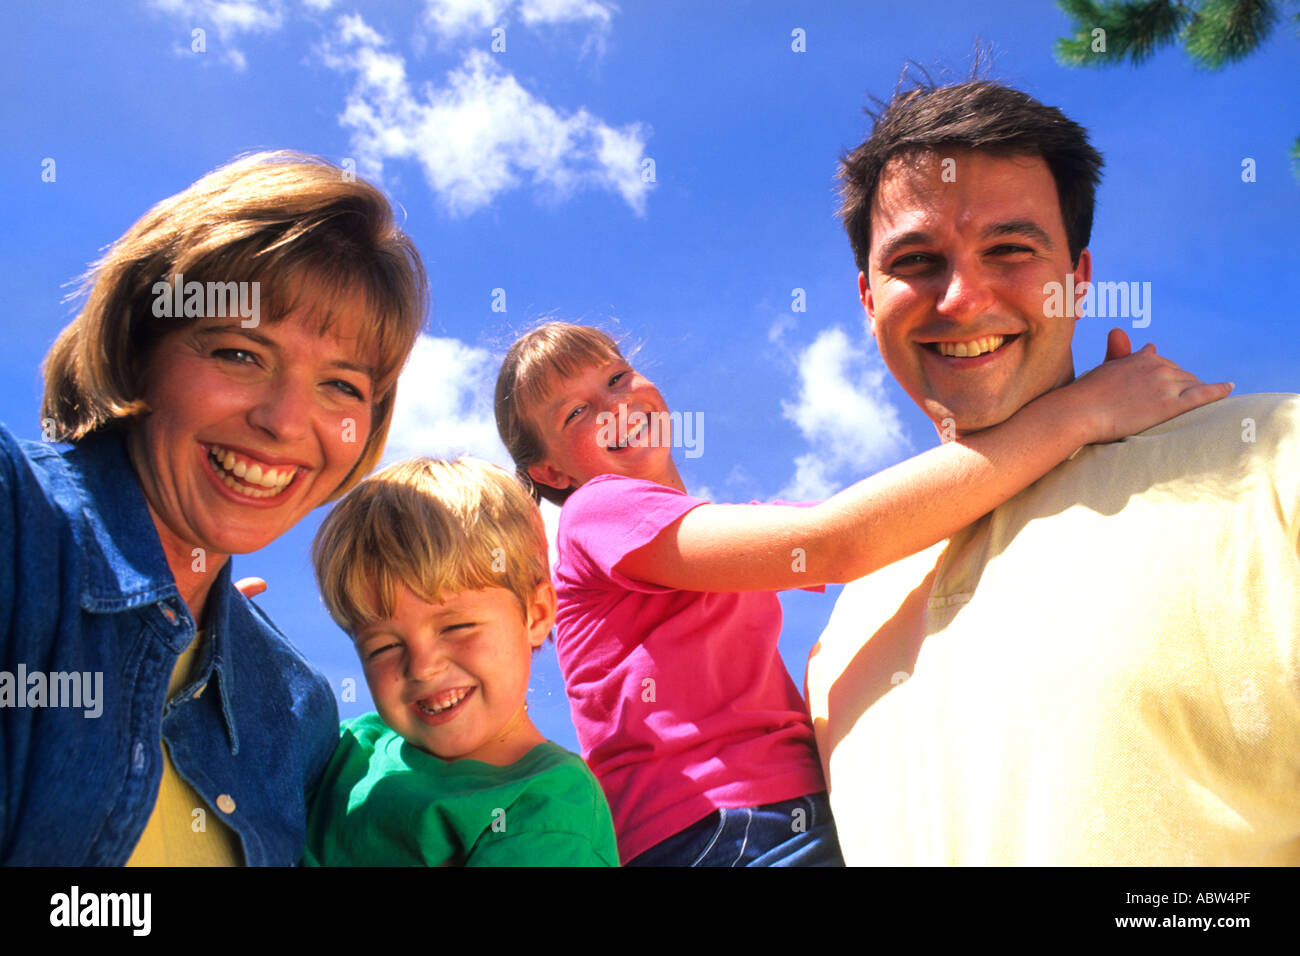 Young affluent family spending quality time together at a local park portrait from below Stock Photo